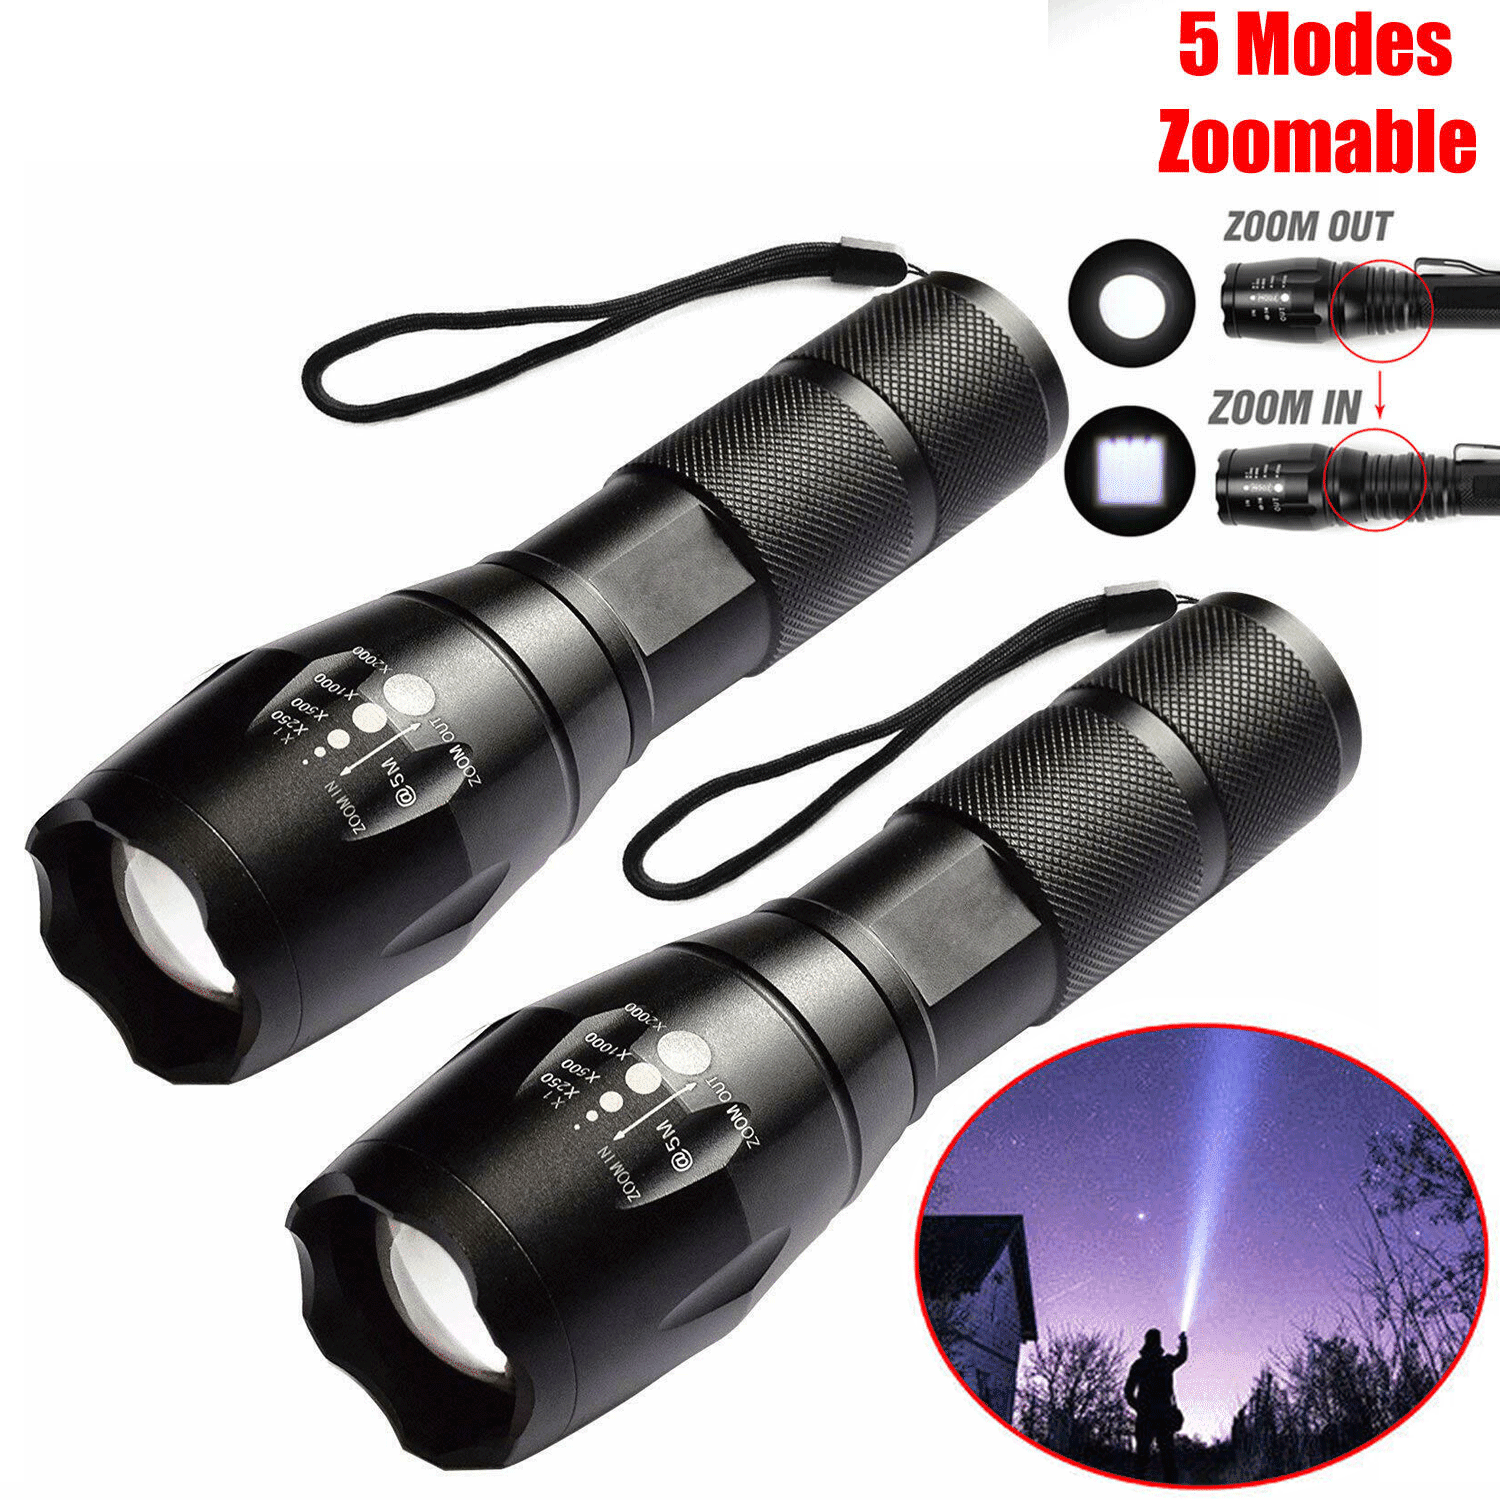 2PC Super Bright 900000LM Tactical Police T6 LED Flashlight Torch Light Zoomable 